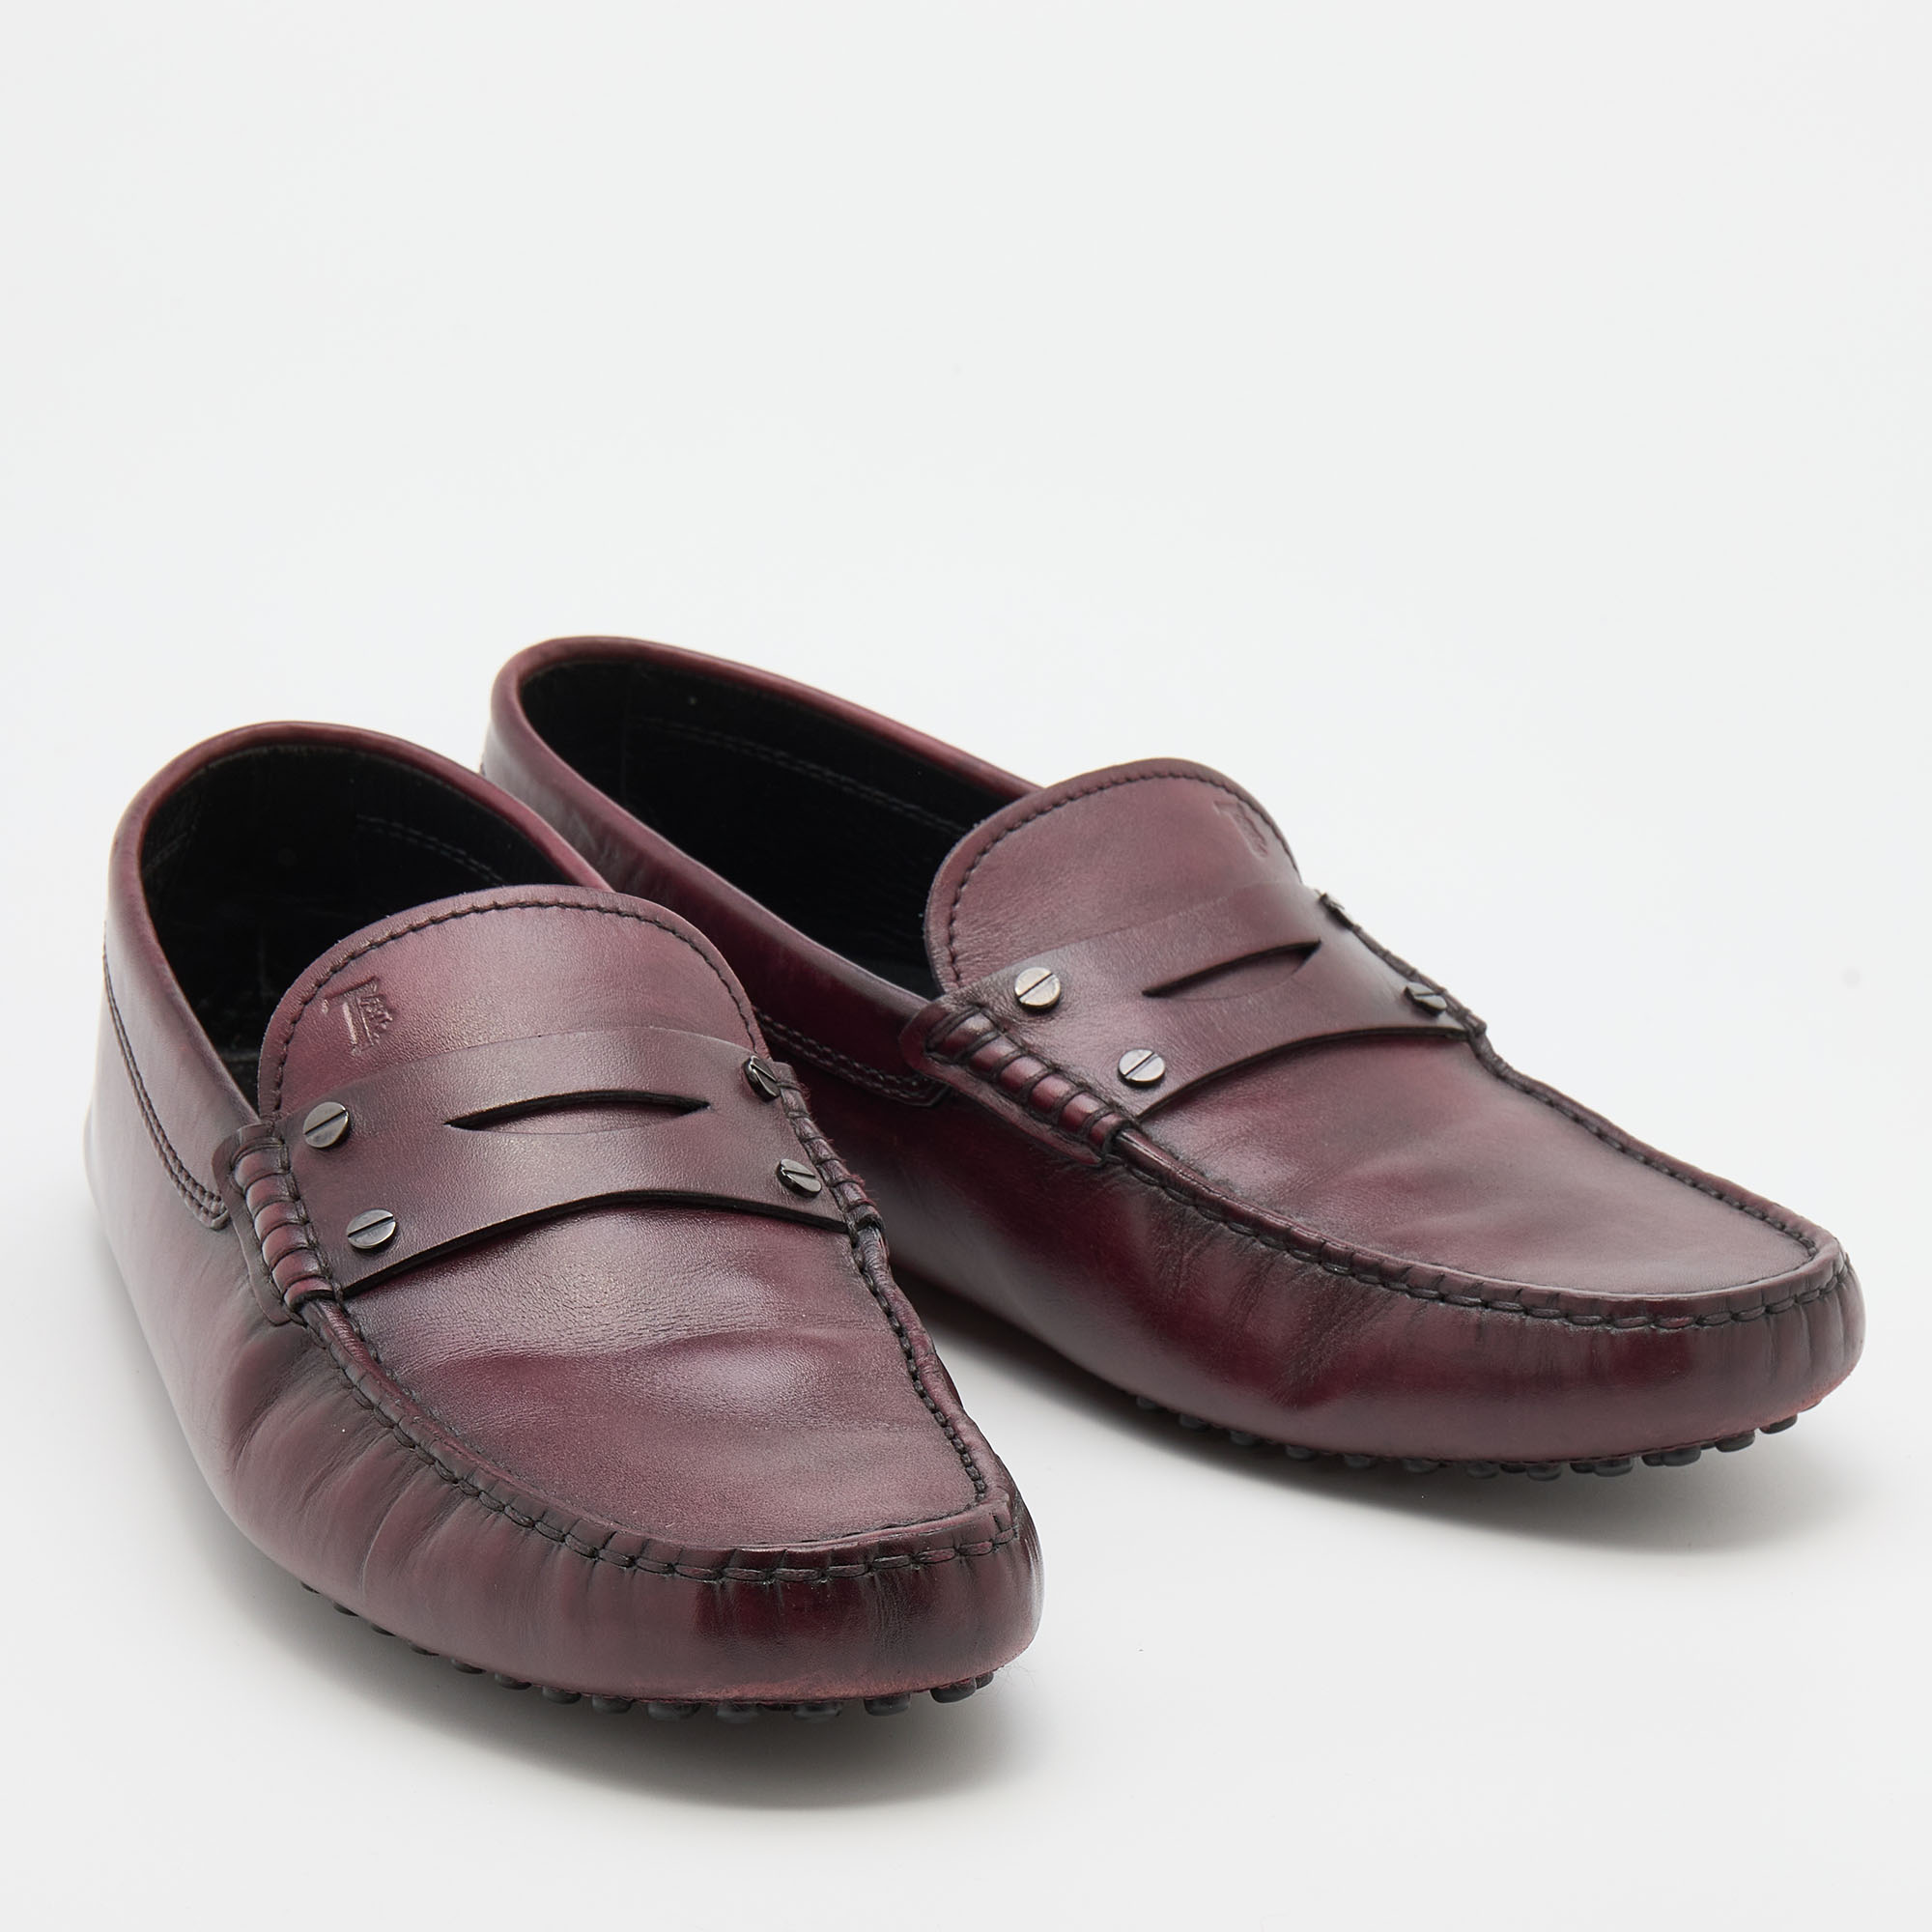 Tod's Burgundy Leather Slip On Loafers Size 41.5